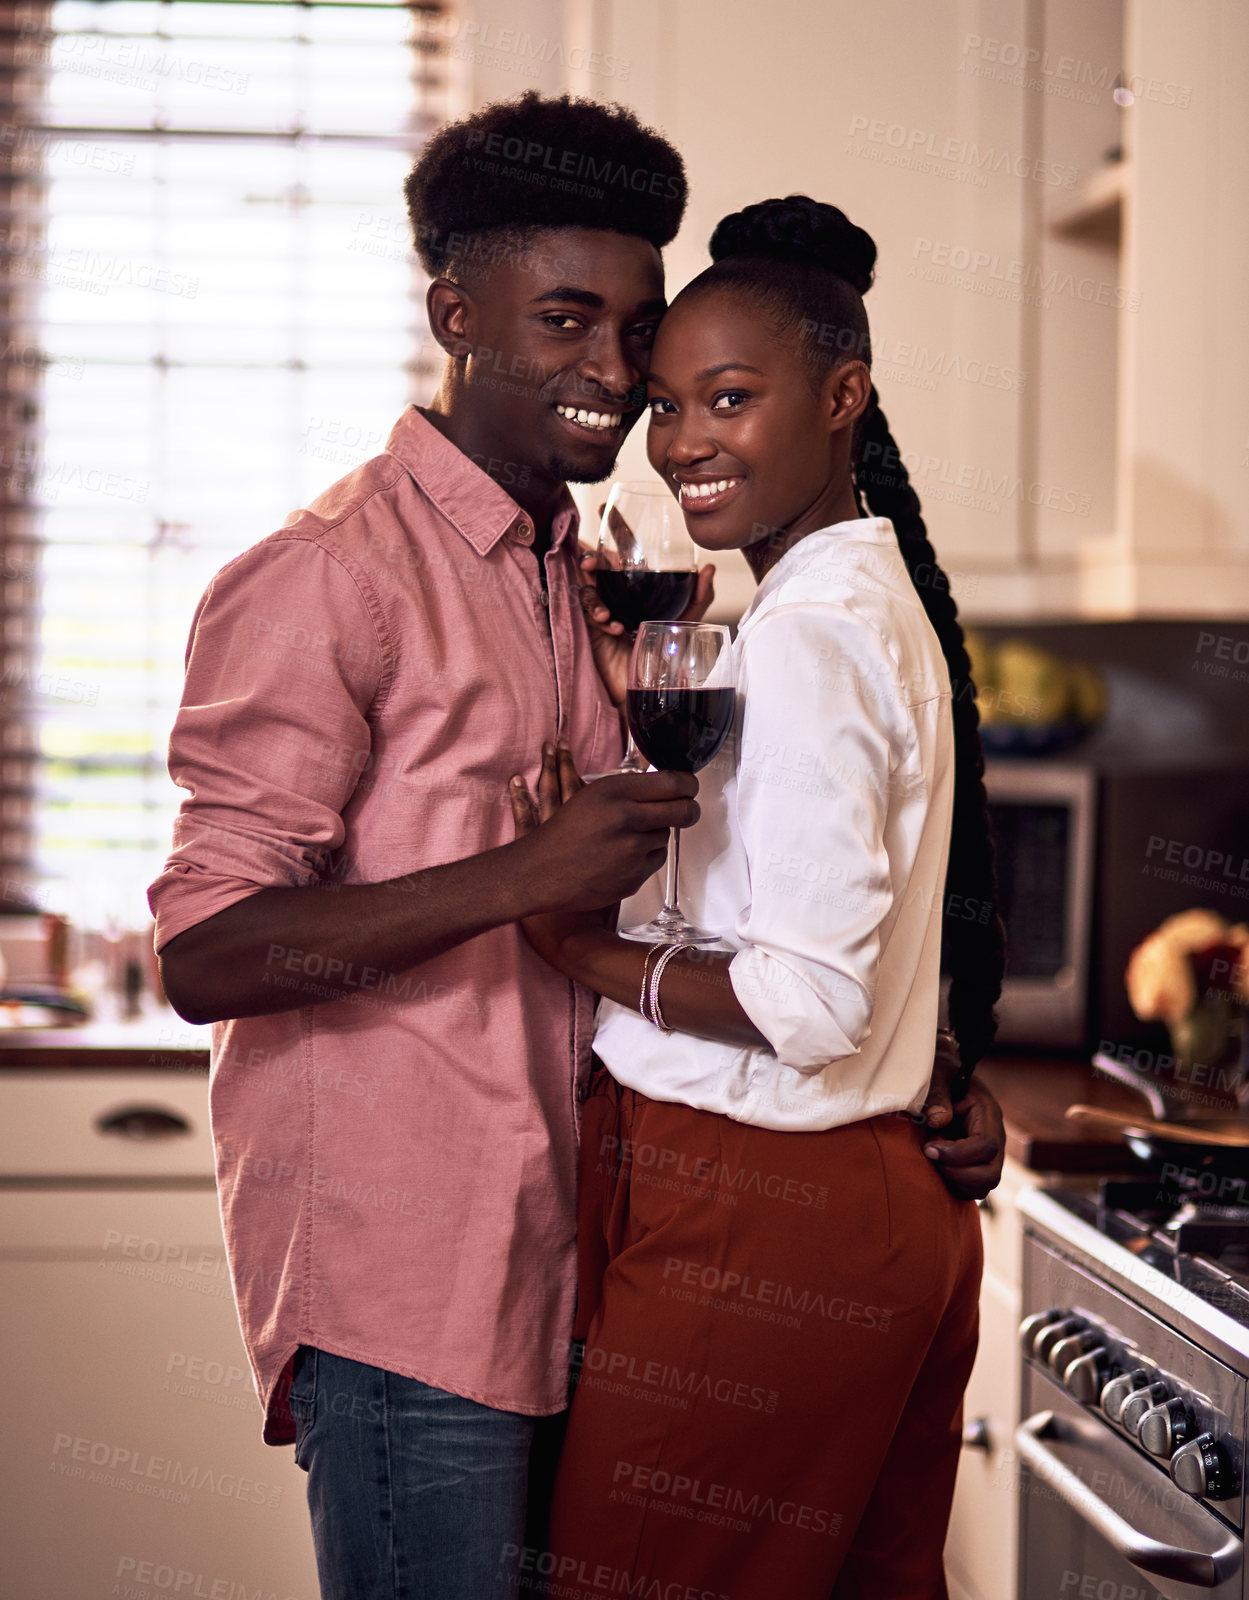 Buy stock photo Cropped portrait of an affectionate young couple smiling while holding wine glasses in their kitchen at home